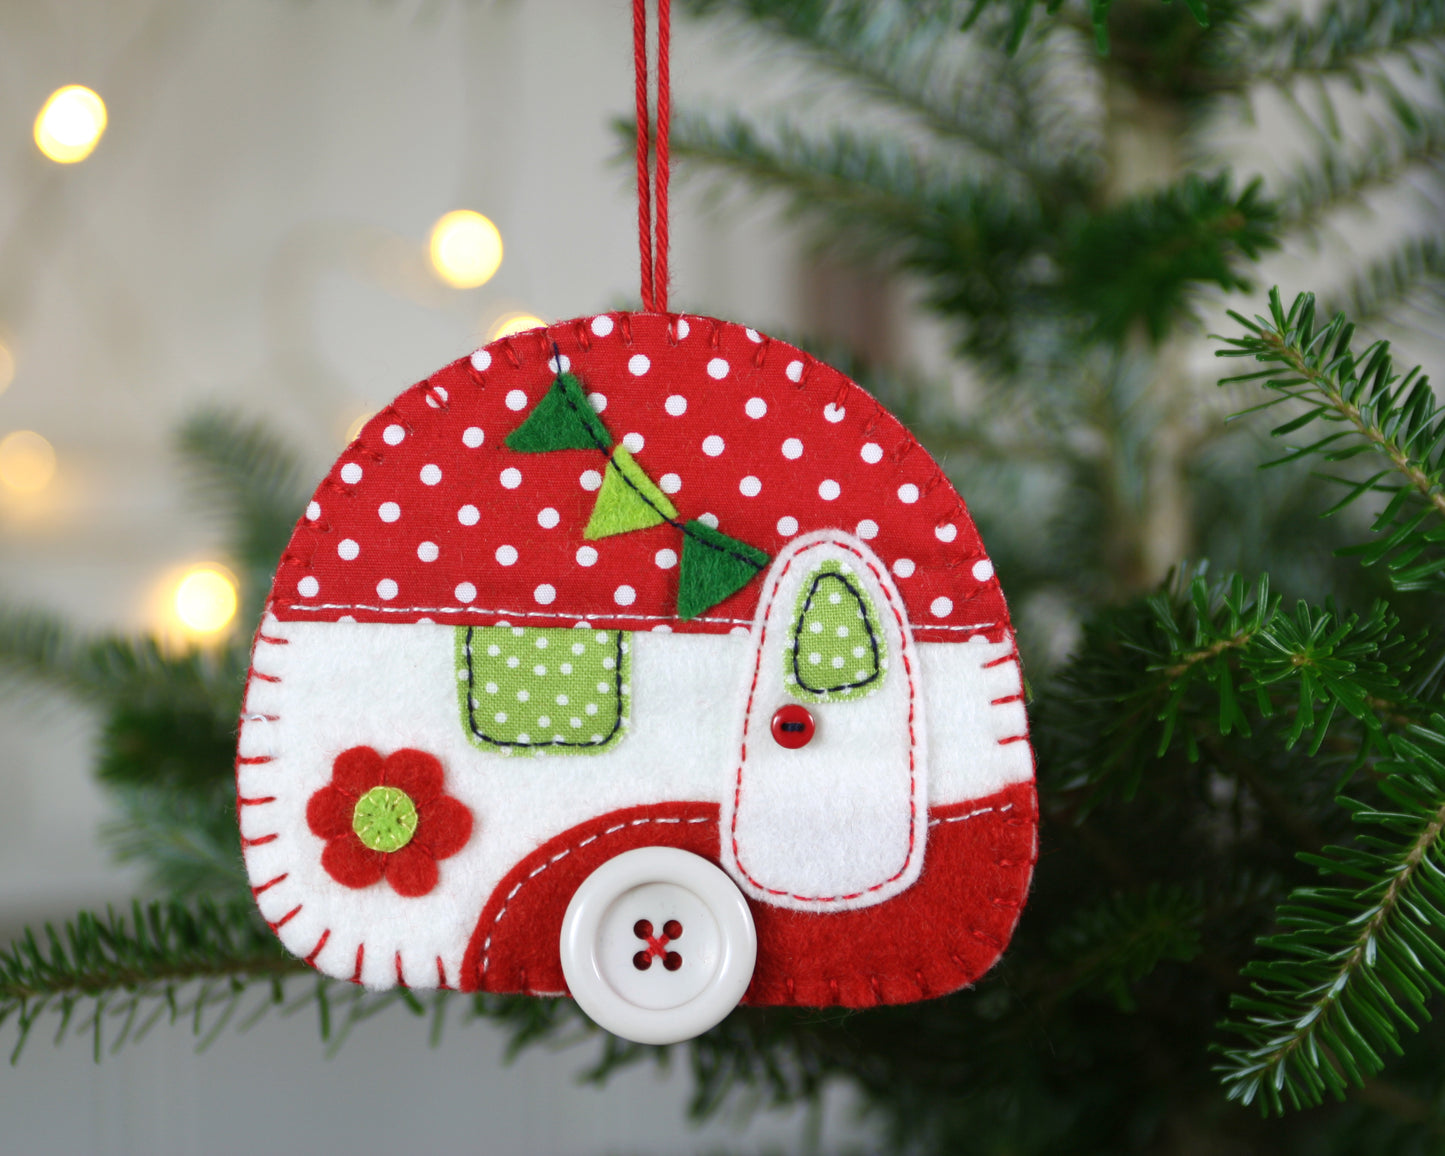 Large camper Christmas ornament in red and white